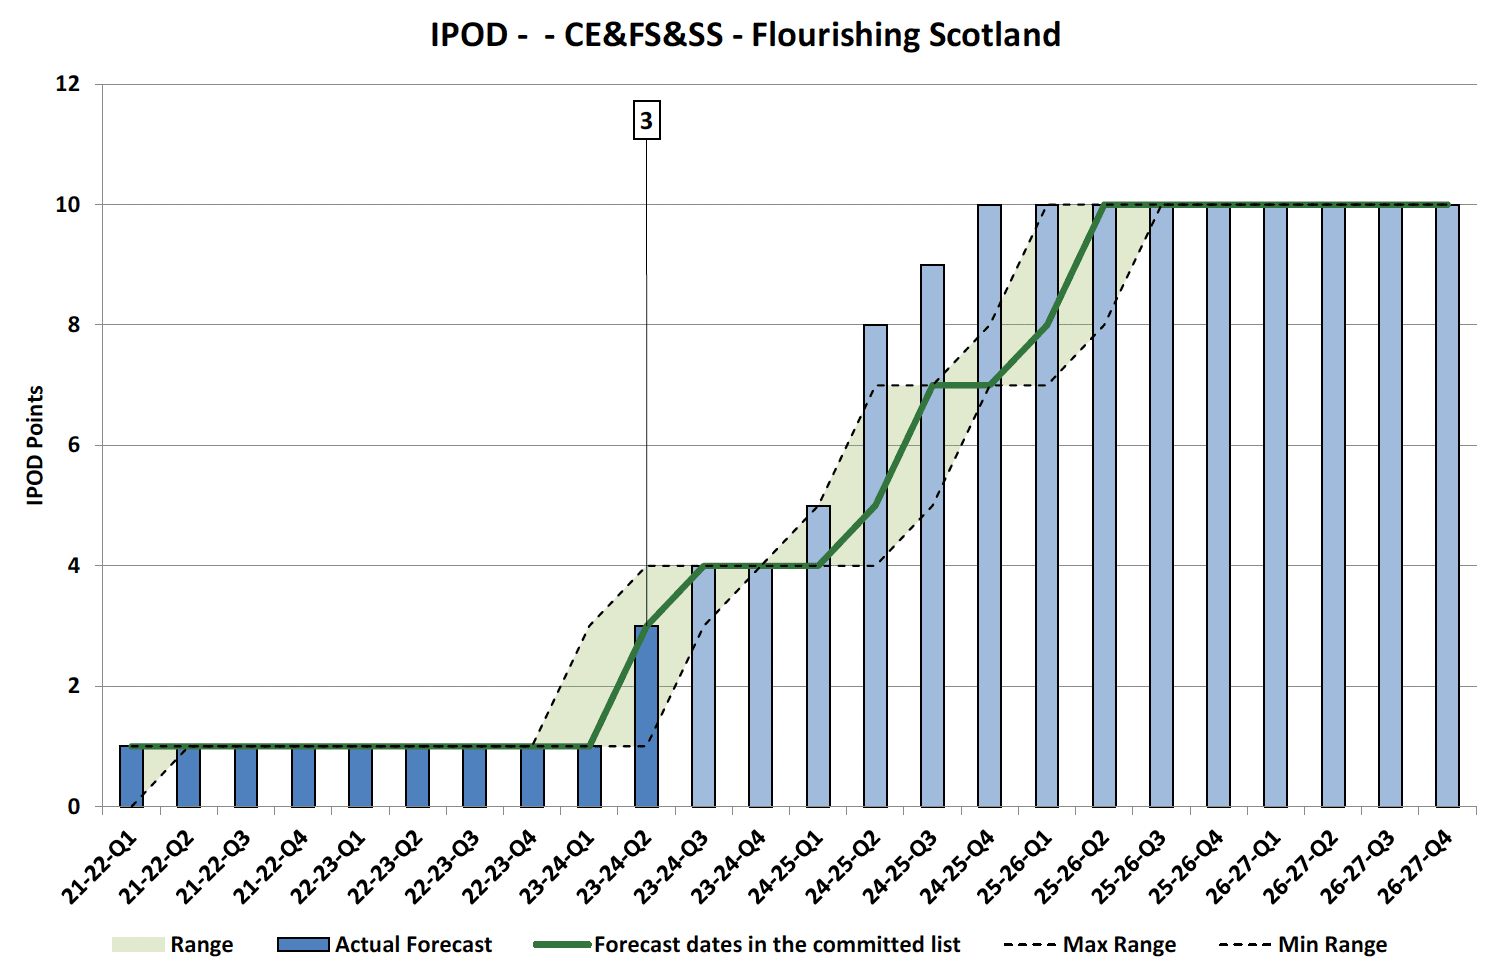 Chart showing IPOD points achieved or forecast for all milestones against target range for Flourishing Scotland Projects in CE&FS&SS Portfolio